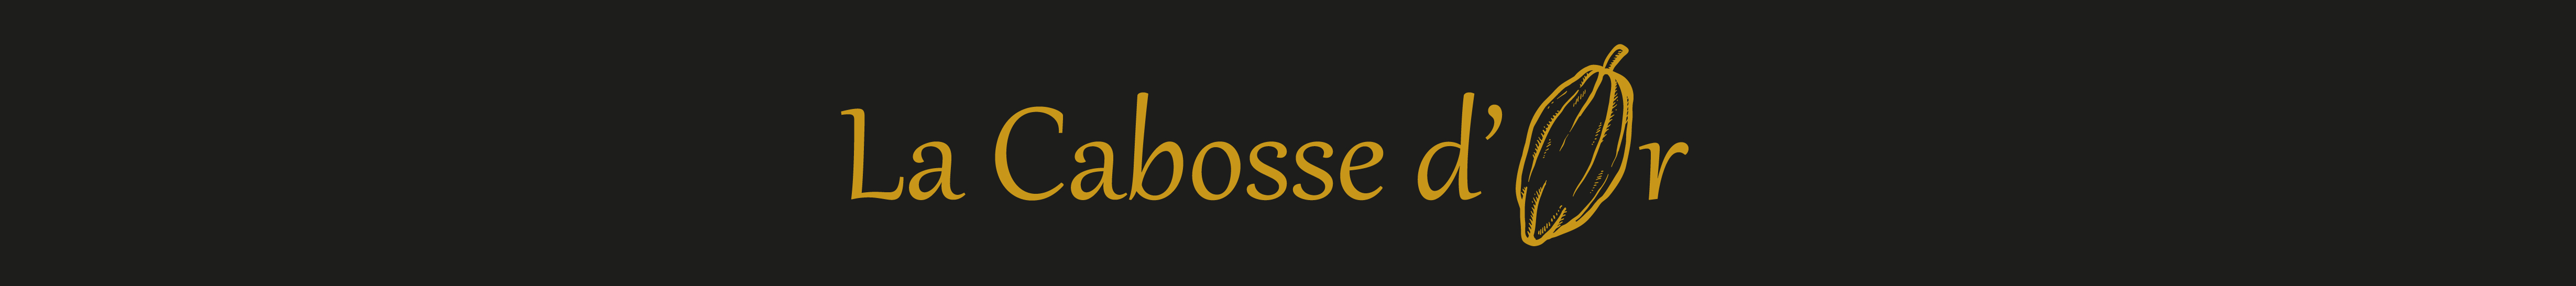 Cabosse d'or